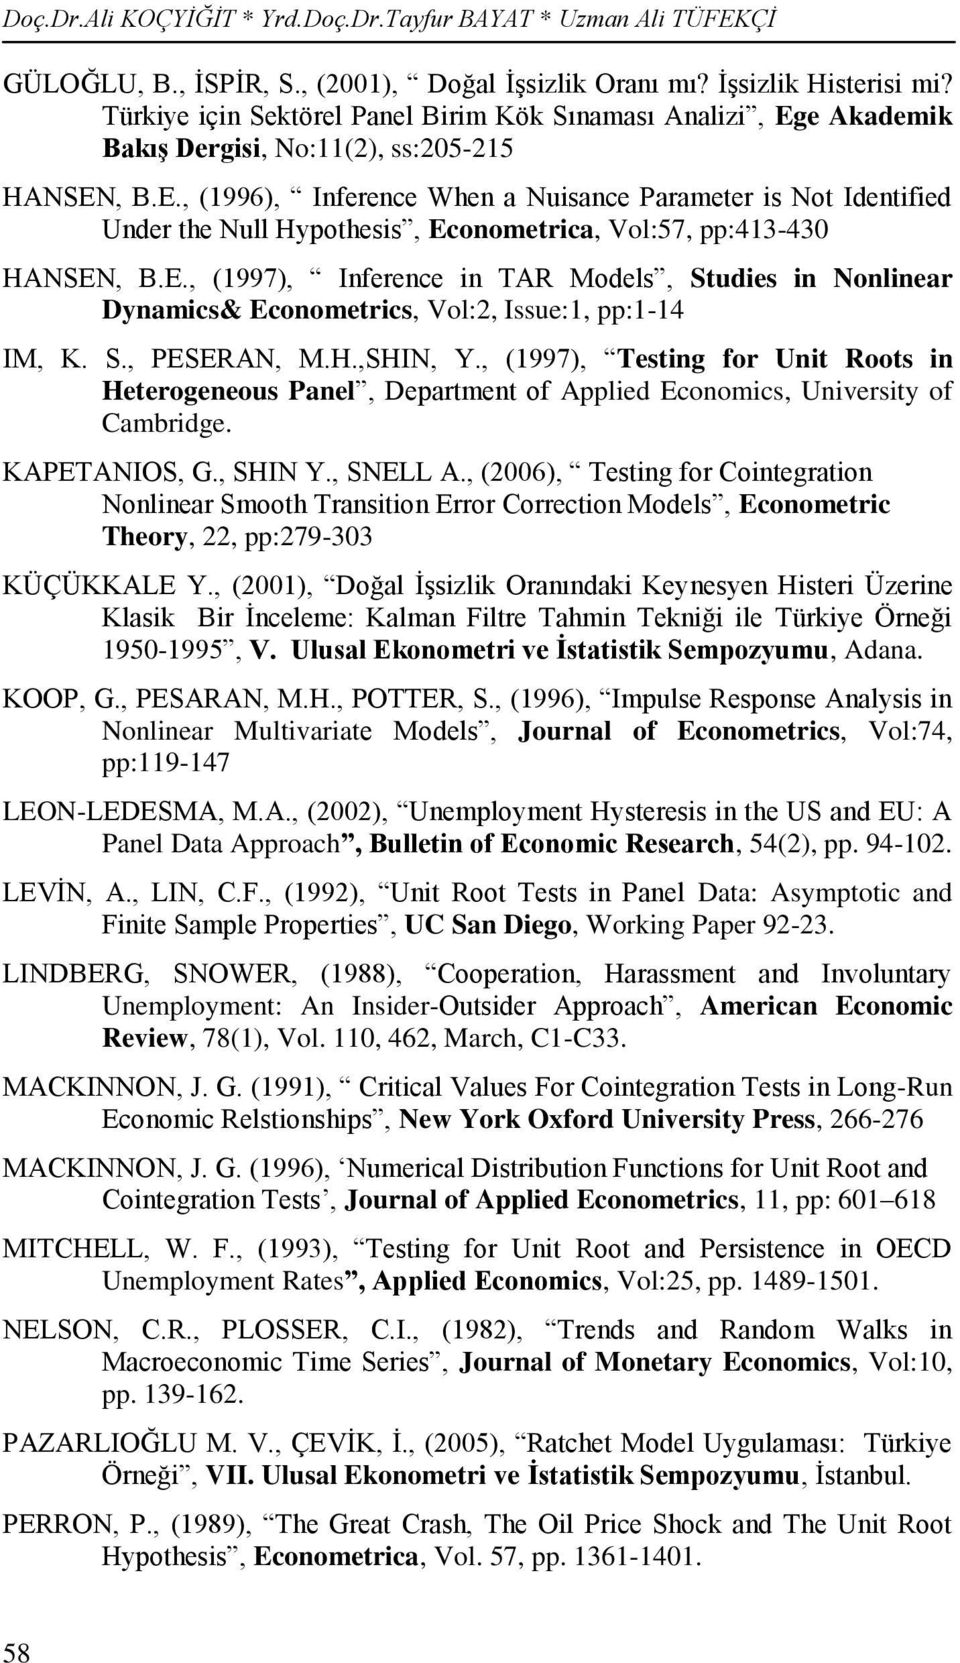 E., (1997), Inference in TAR Models, Sudies in Nonlinear Dnamics& Economerics, Vol:2, Issue:1, pp:1-14 IM, K. S., PESERAN, M.H.,SHIN, Y.